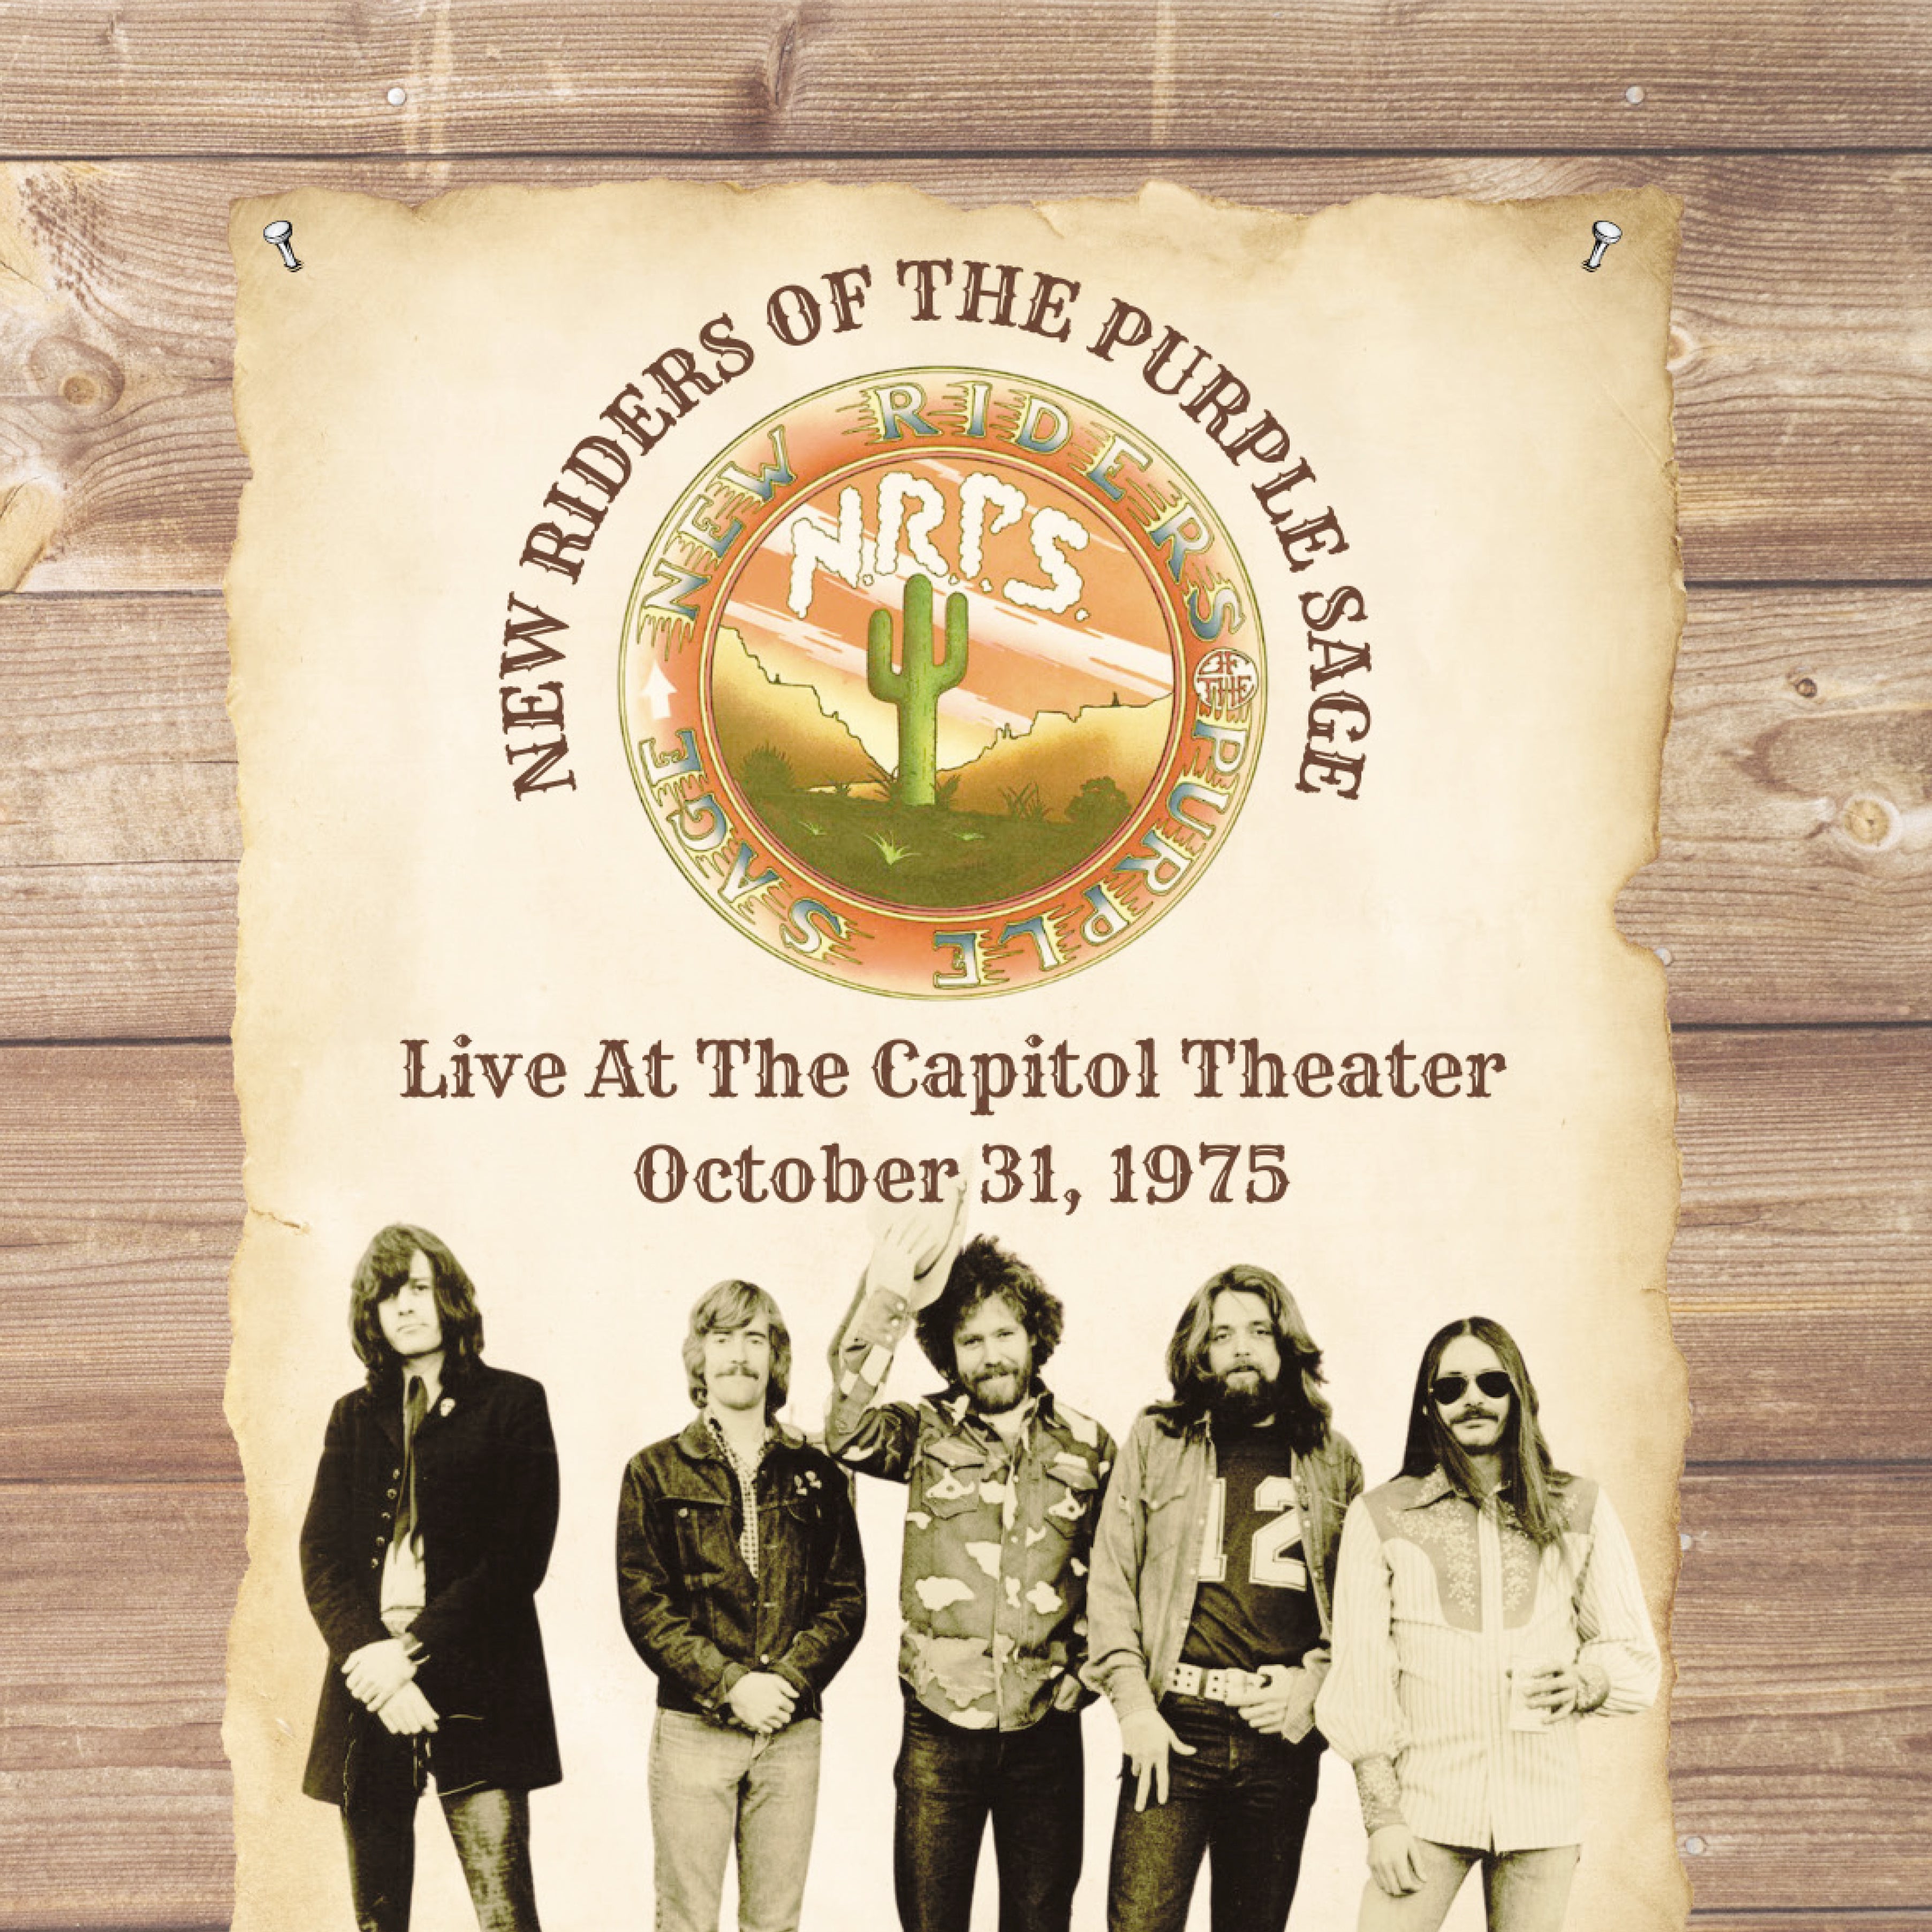 New Riders of the Purple Sage - Live At The Capitol Theater October 31